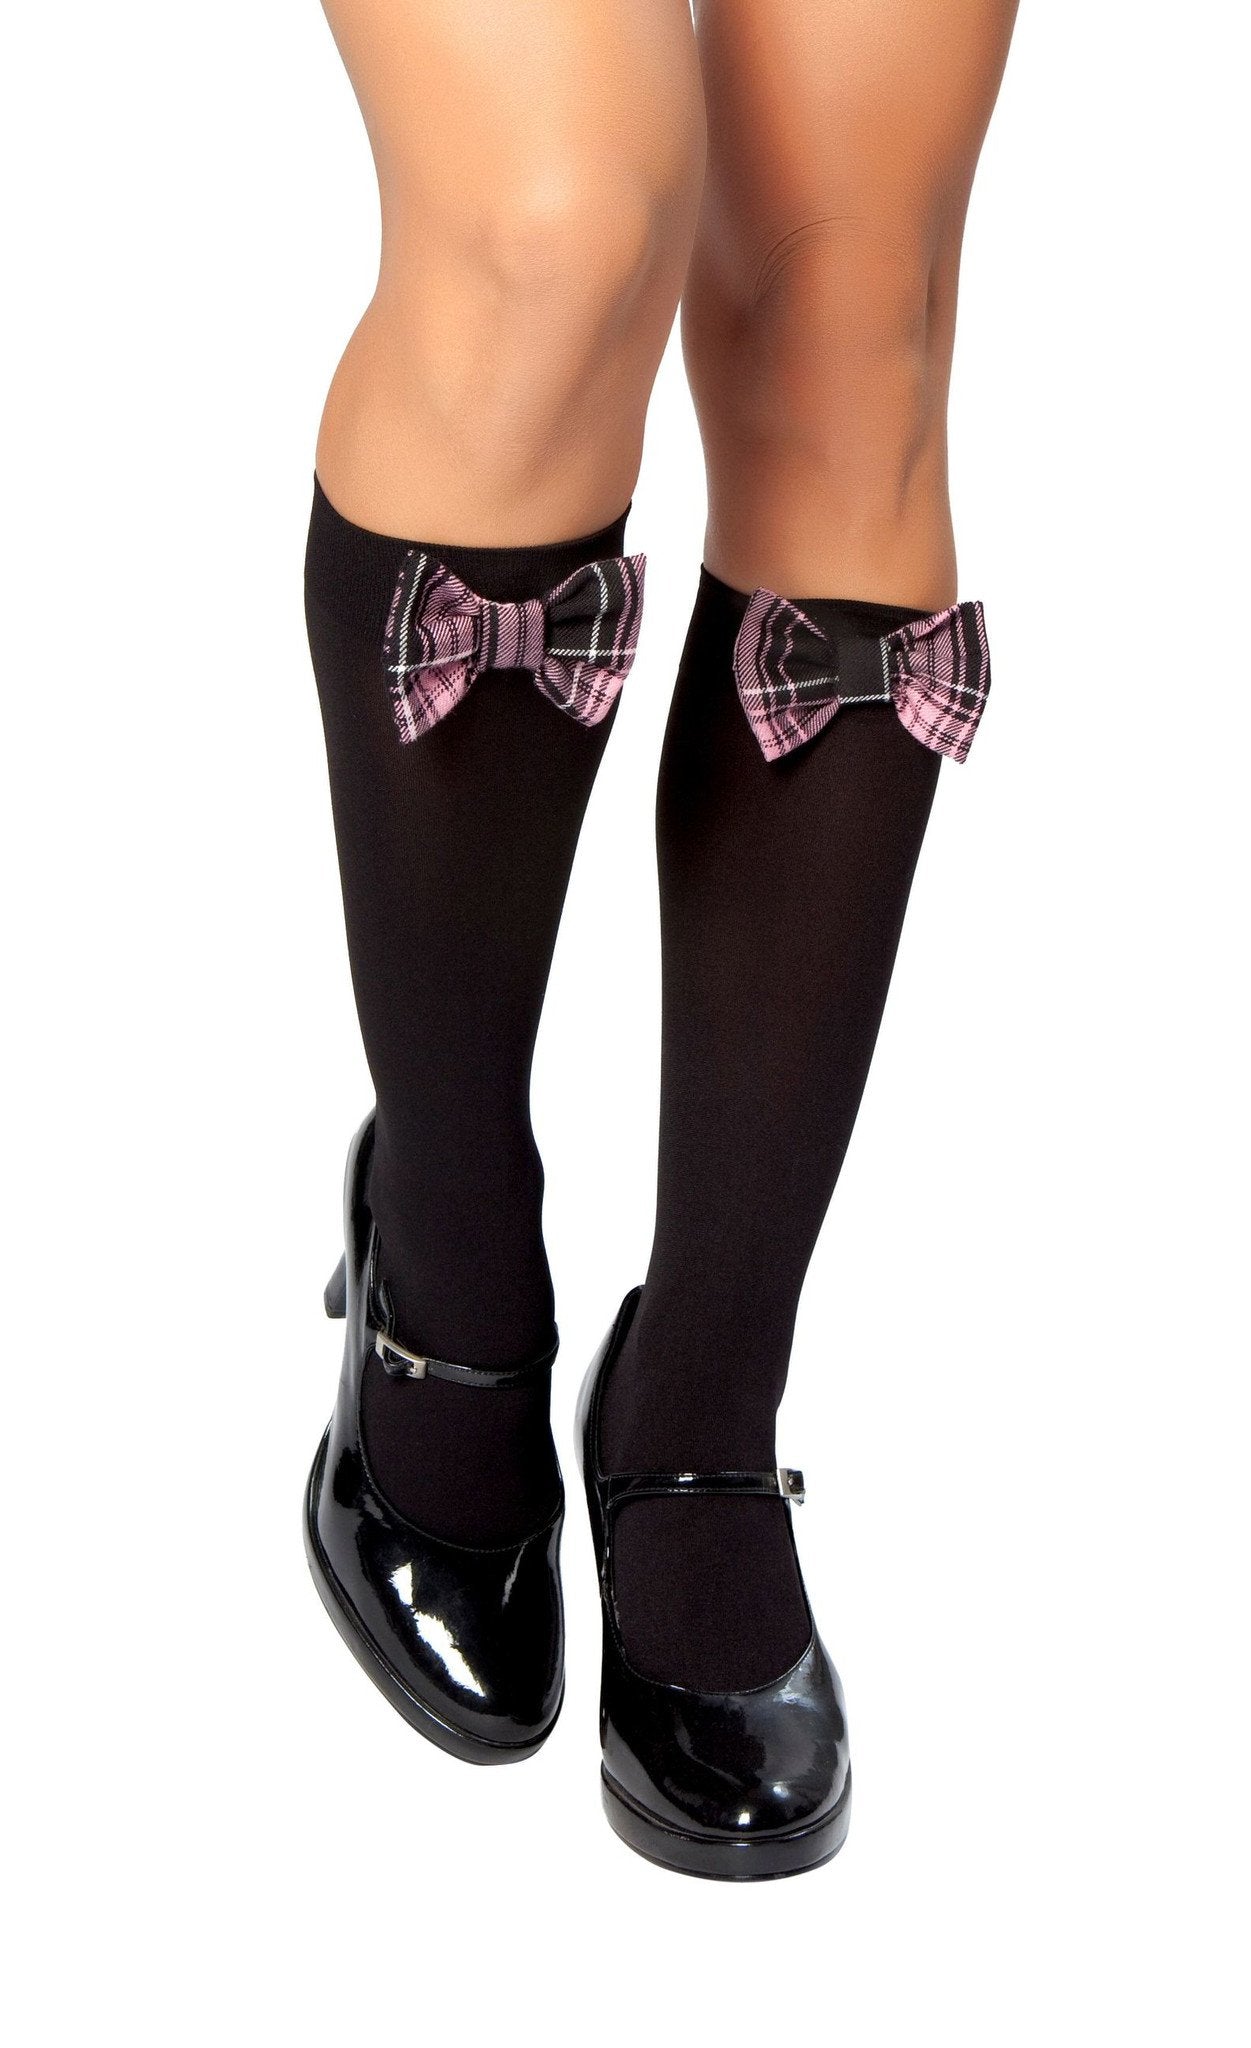 Pair of Black Stockings with Black and Pink Plaid Bow